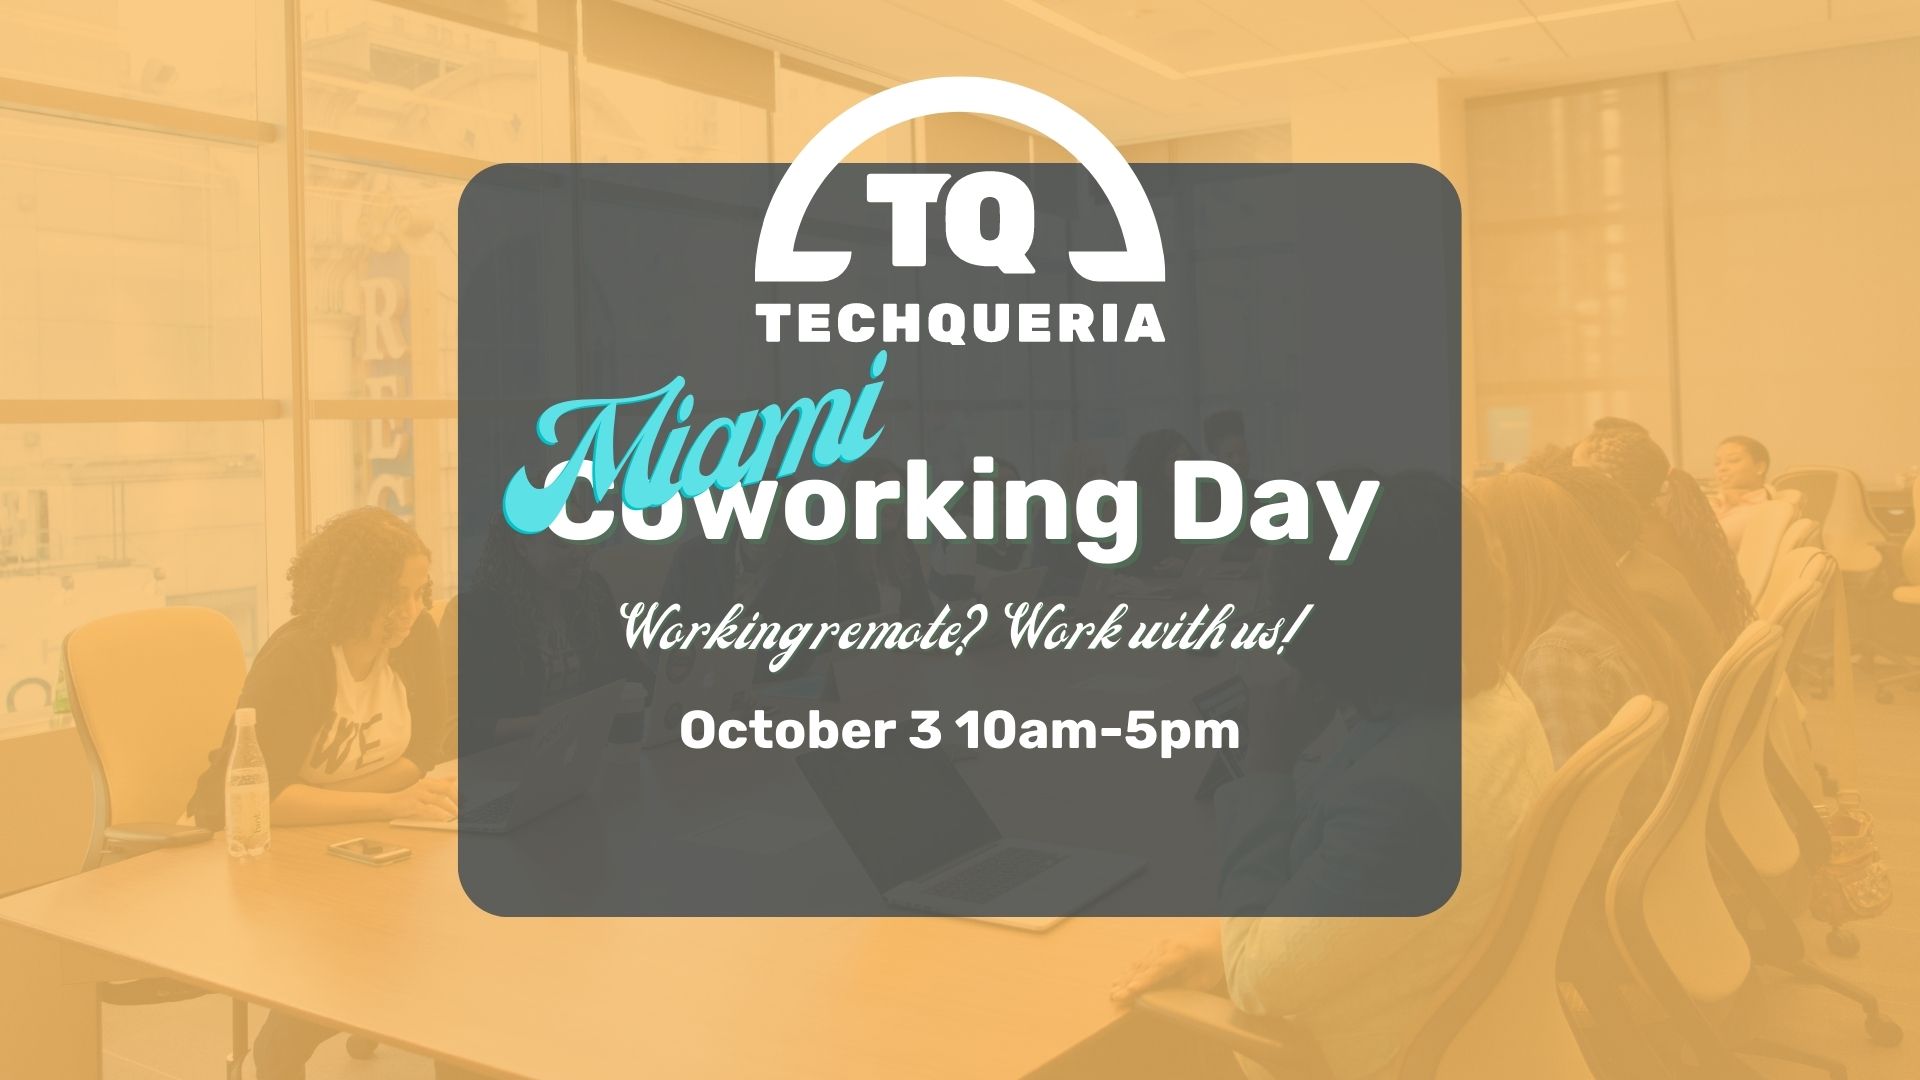 Flyer for the October coworking day